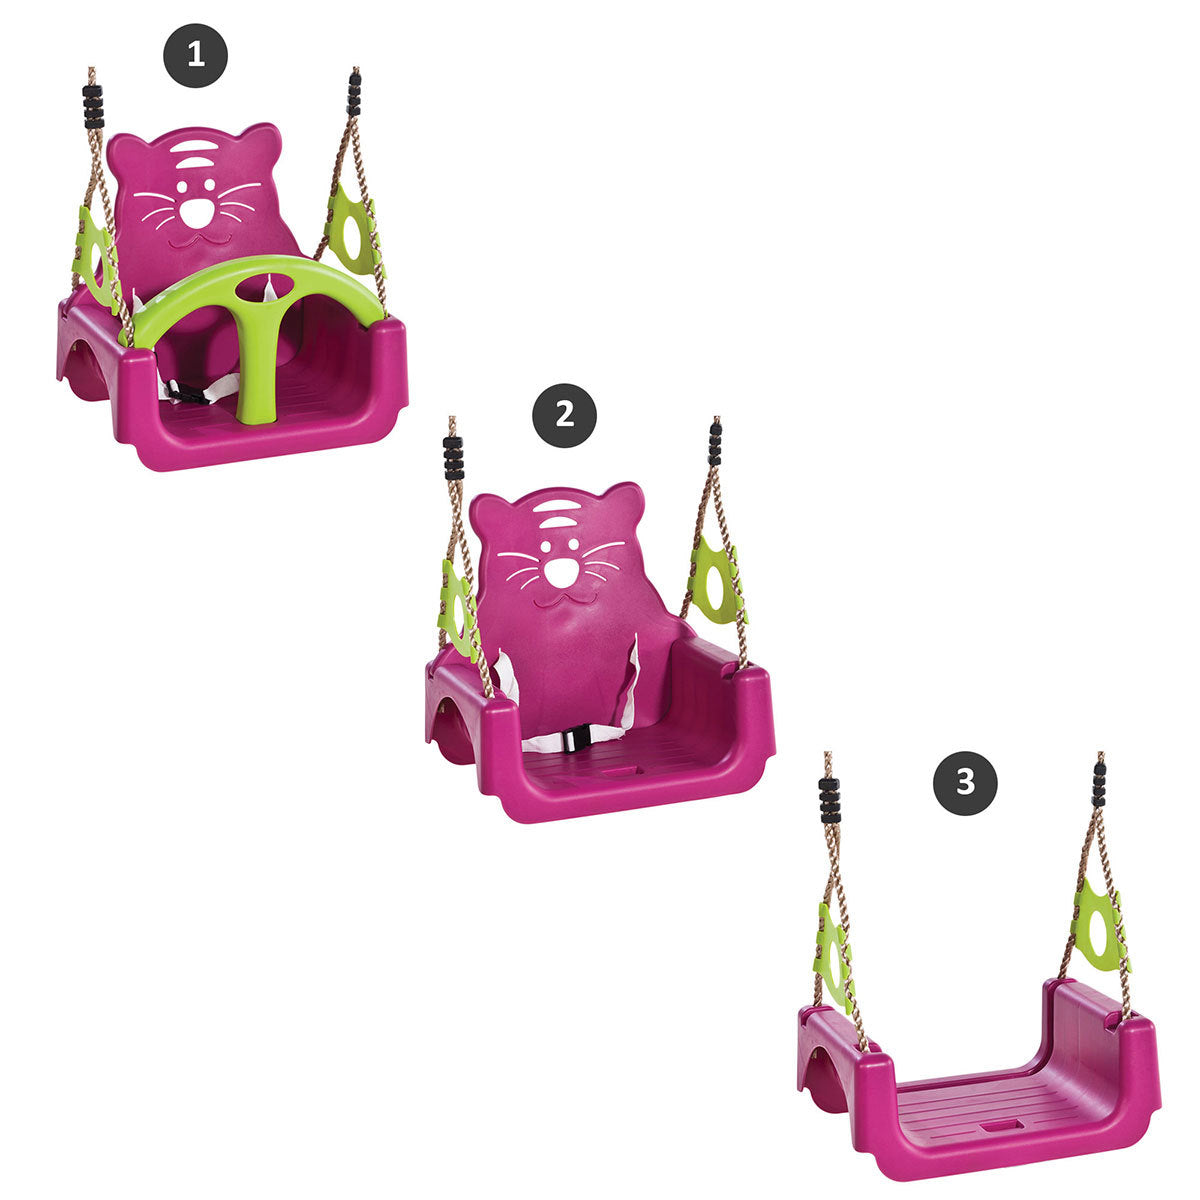 Baby Seat TRIX Growing Type Swing With Adjustable Ropes - PURPLE/LIME